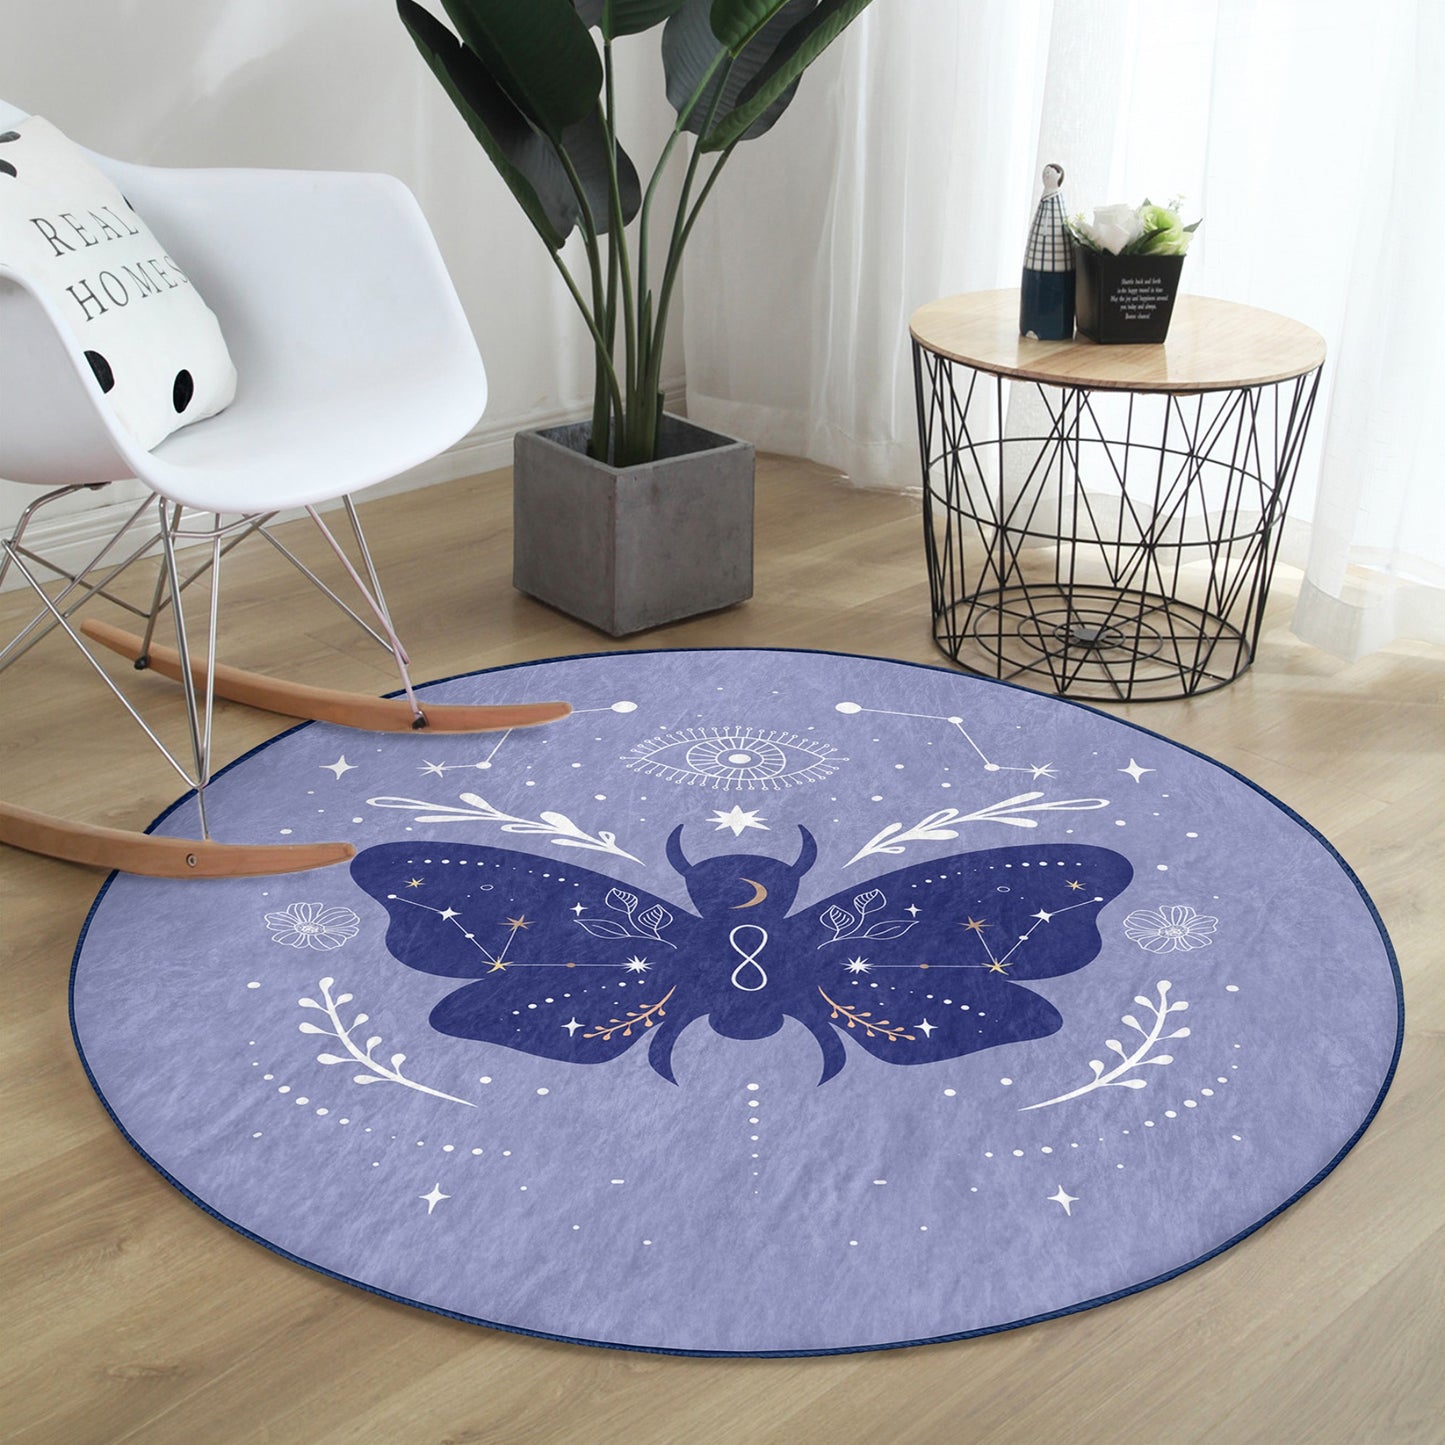 Round Patterned Floor Rug - Stylish Accent